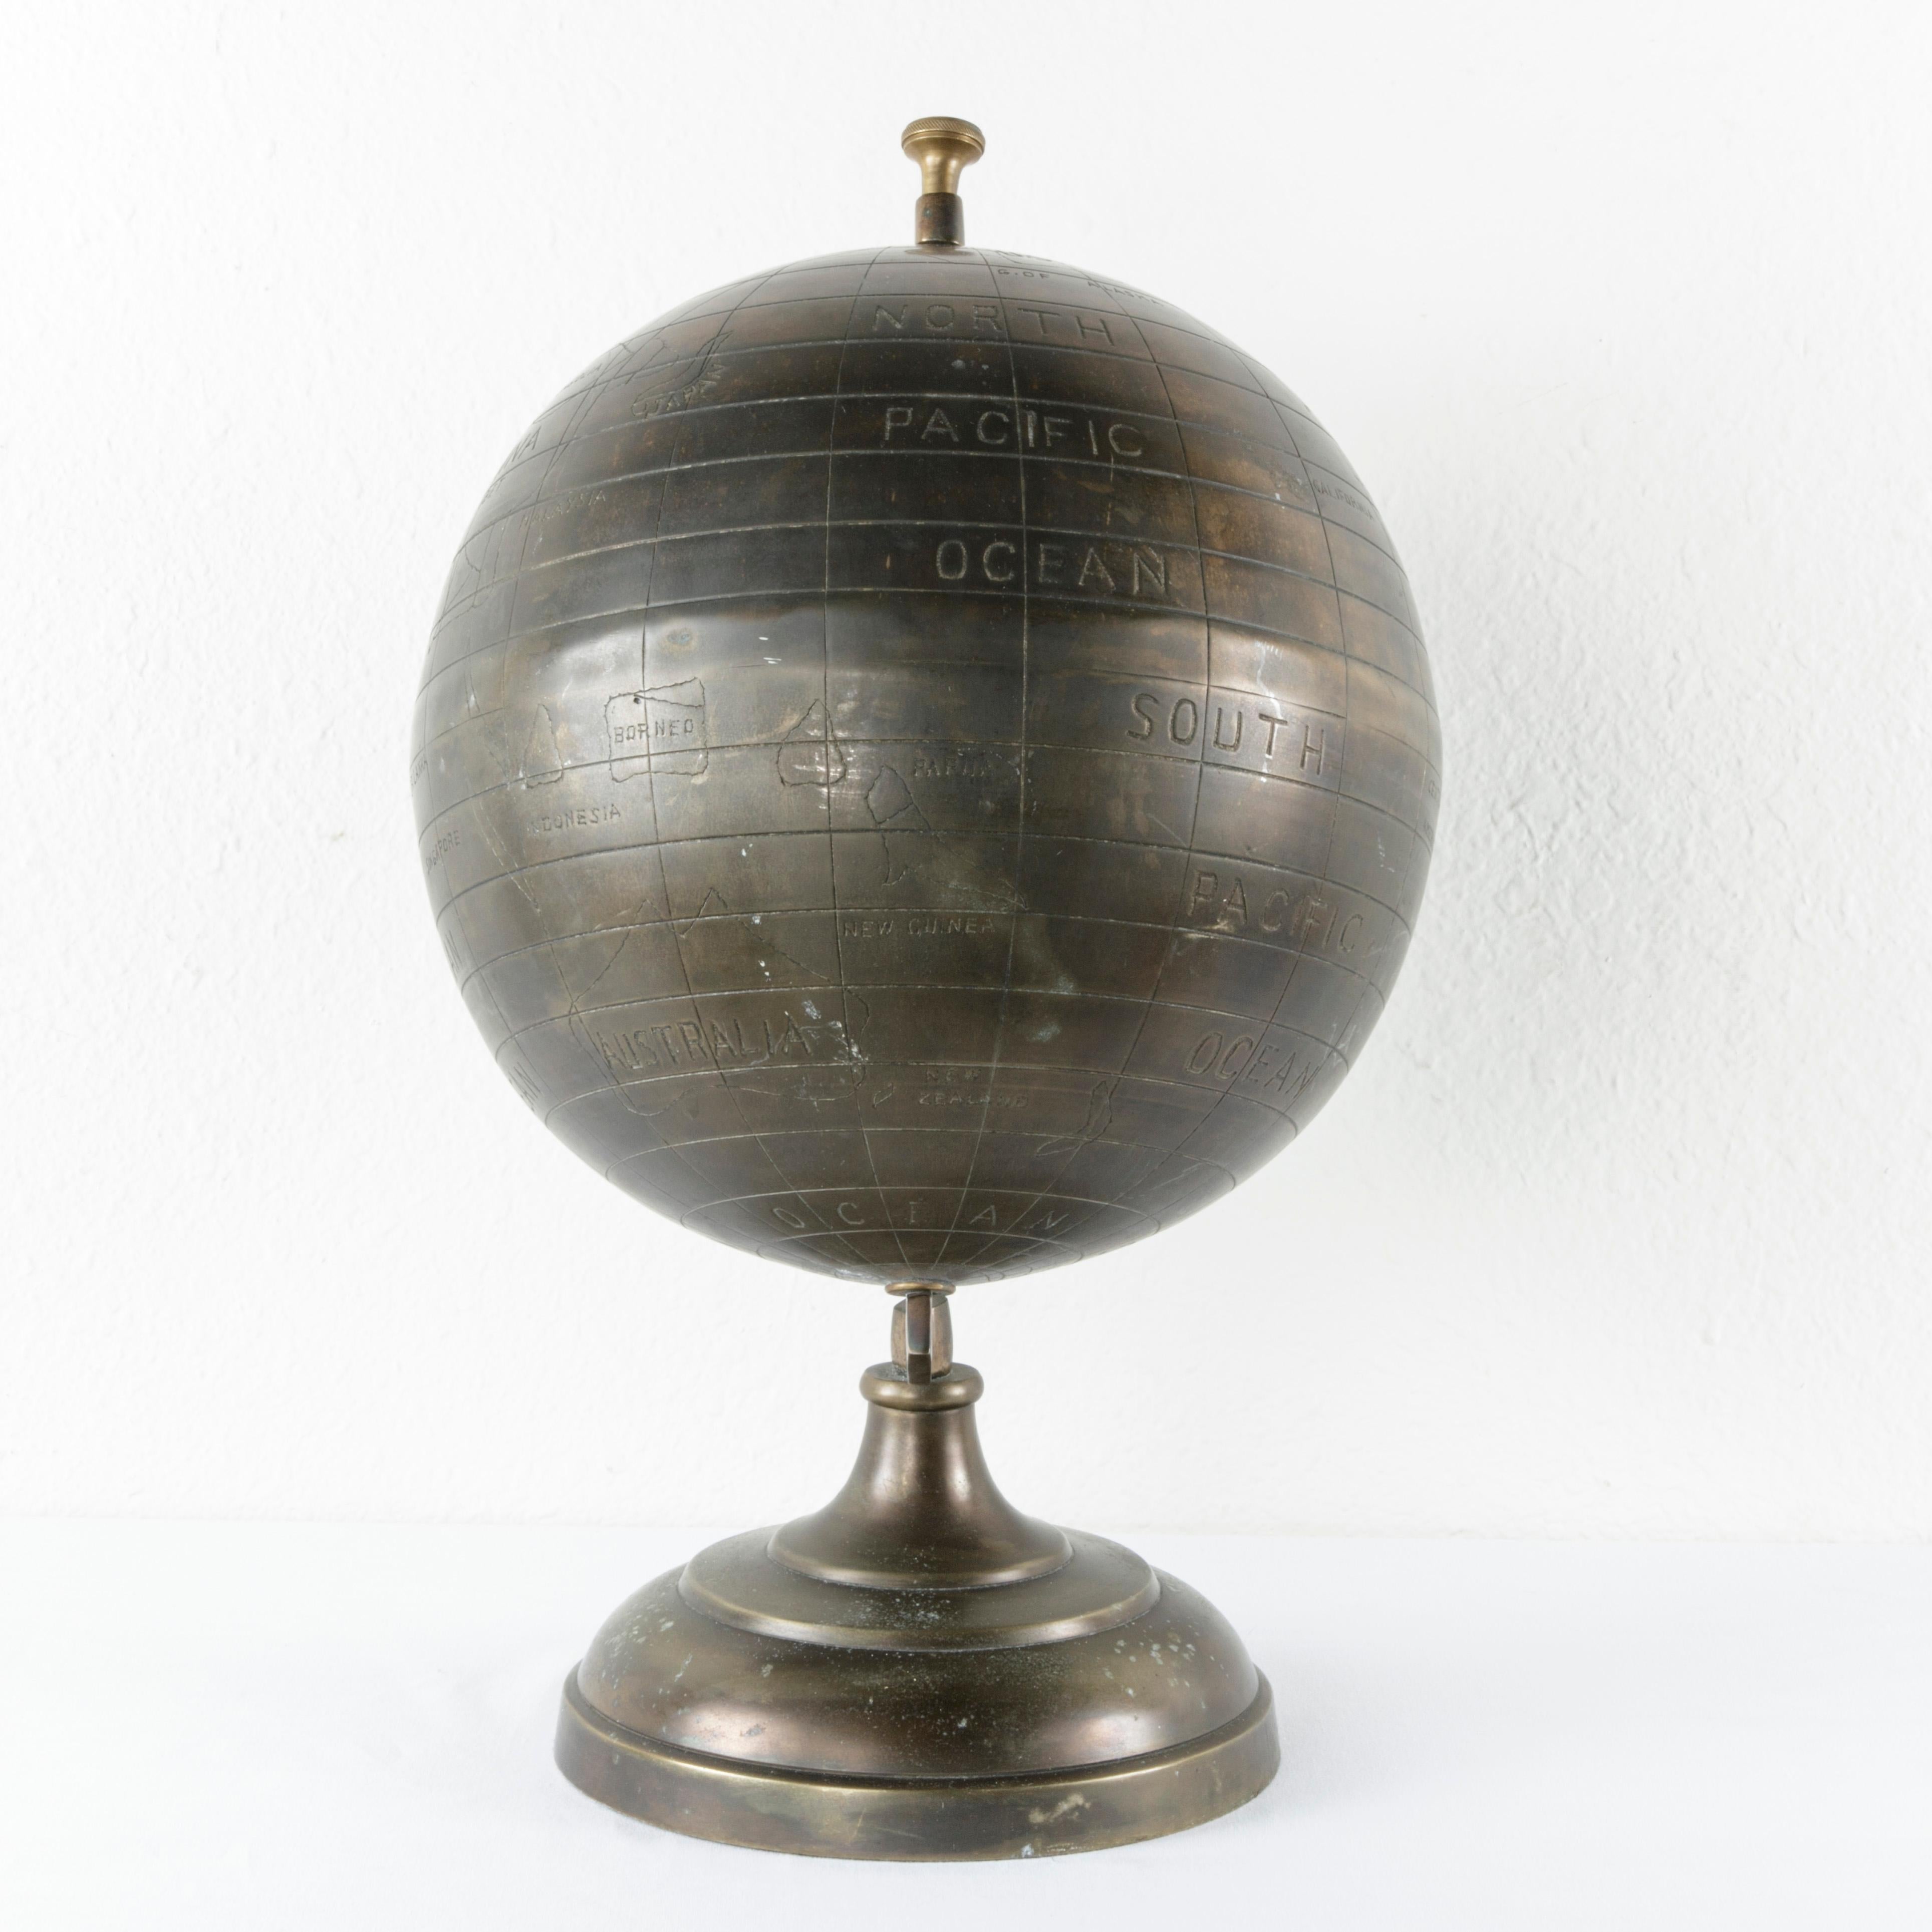 Found in France, this 20th century handmade bronze globe features stylized etched borders, latitudes, and longitudes with land masses and waters labeled in English. This globe can be dated to the 1980s evidenced by the countries of Zaire and